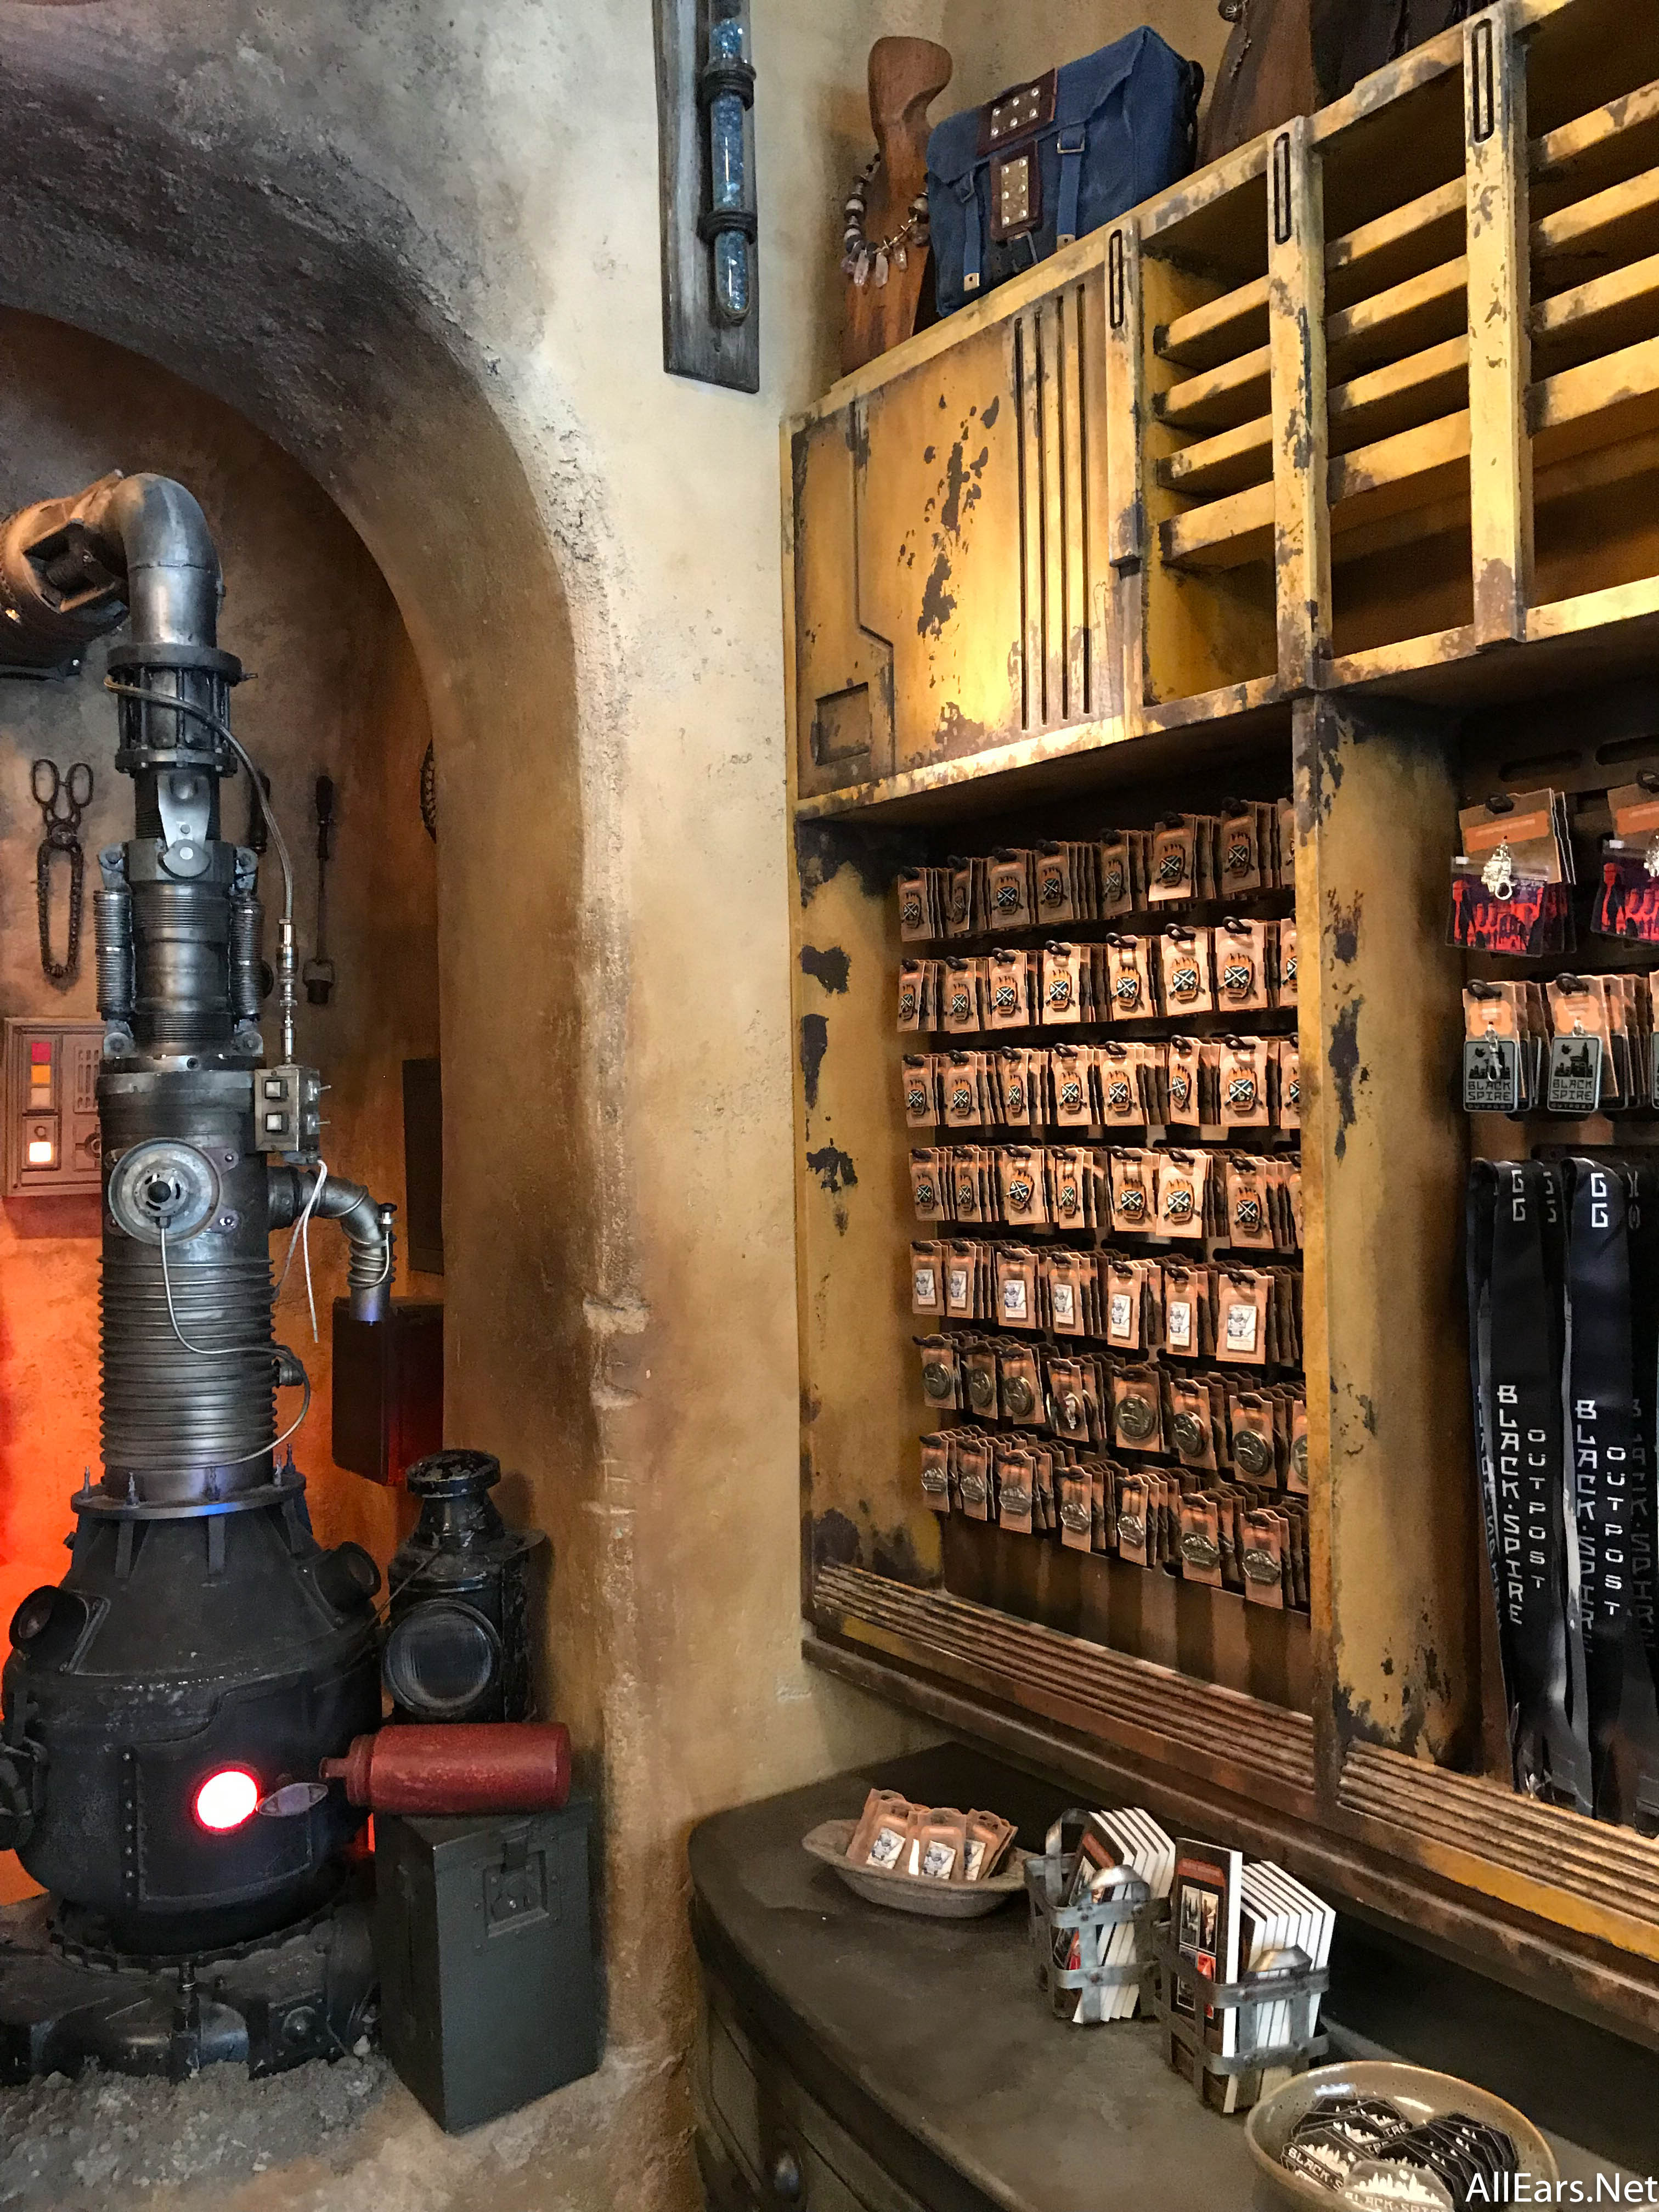 http://allears.net/wp-content/uploads/2019/05/Black-Spire-Outfitters-Star-Wars-Galaxys-Edge-Disneyland-9-2.jpg